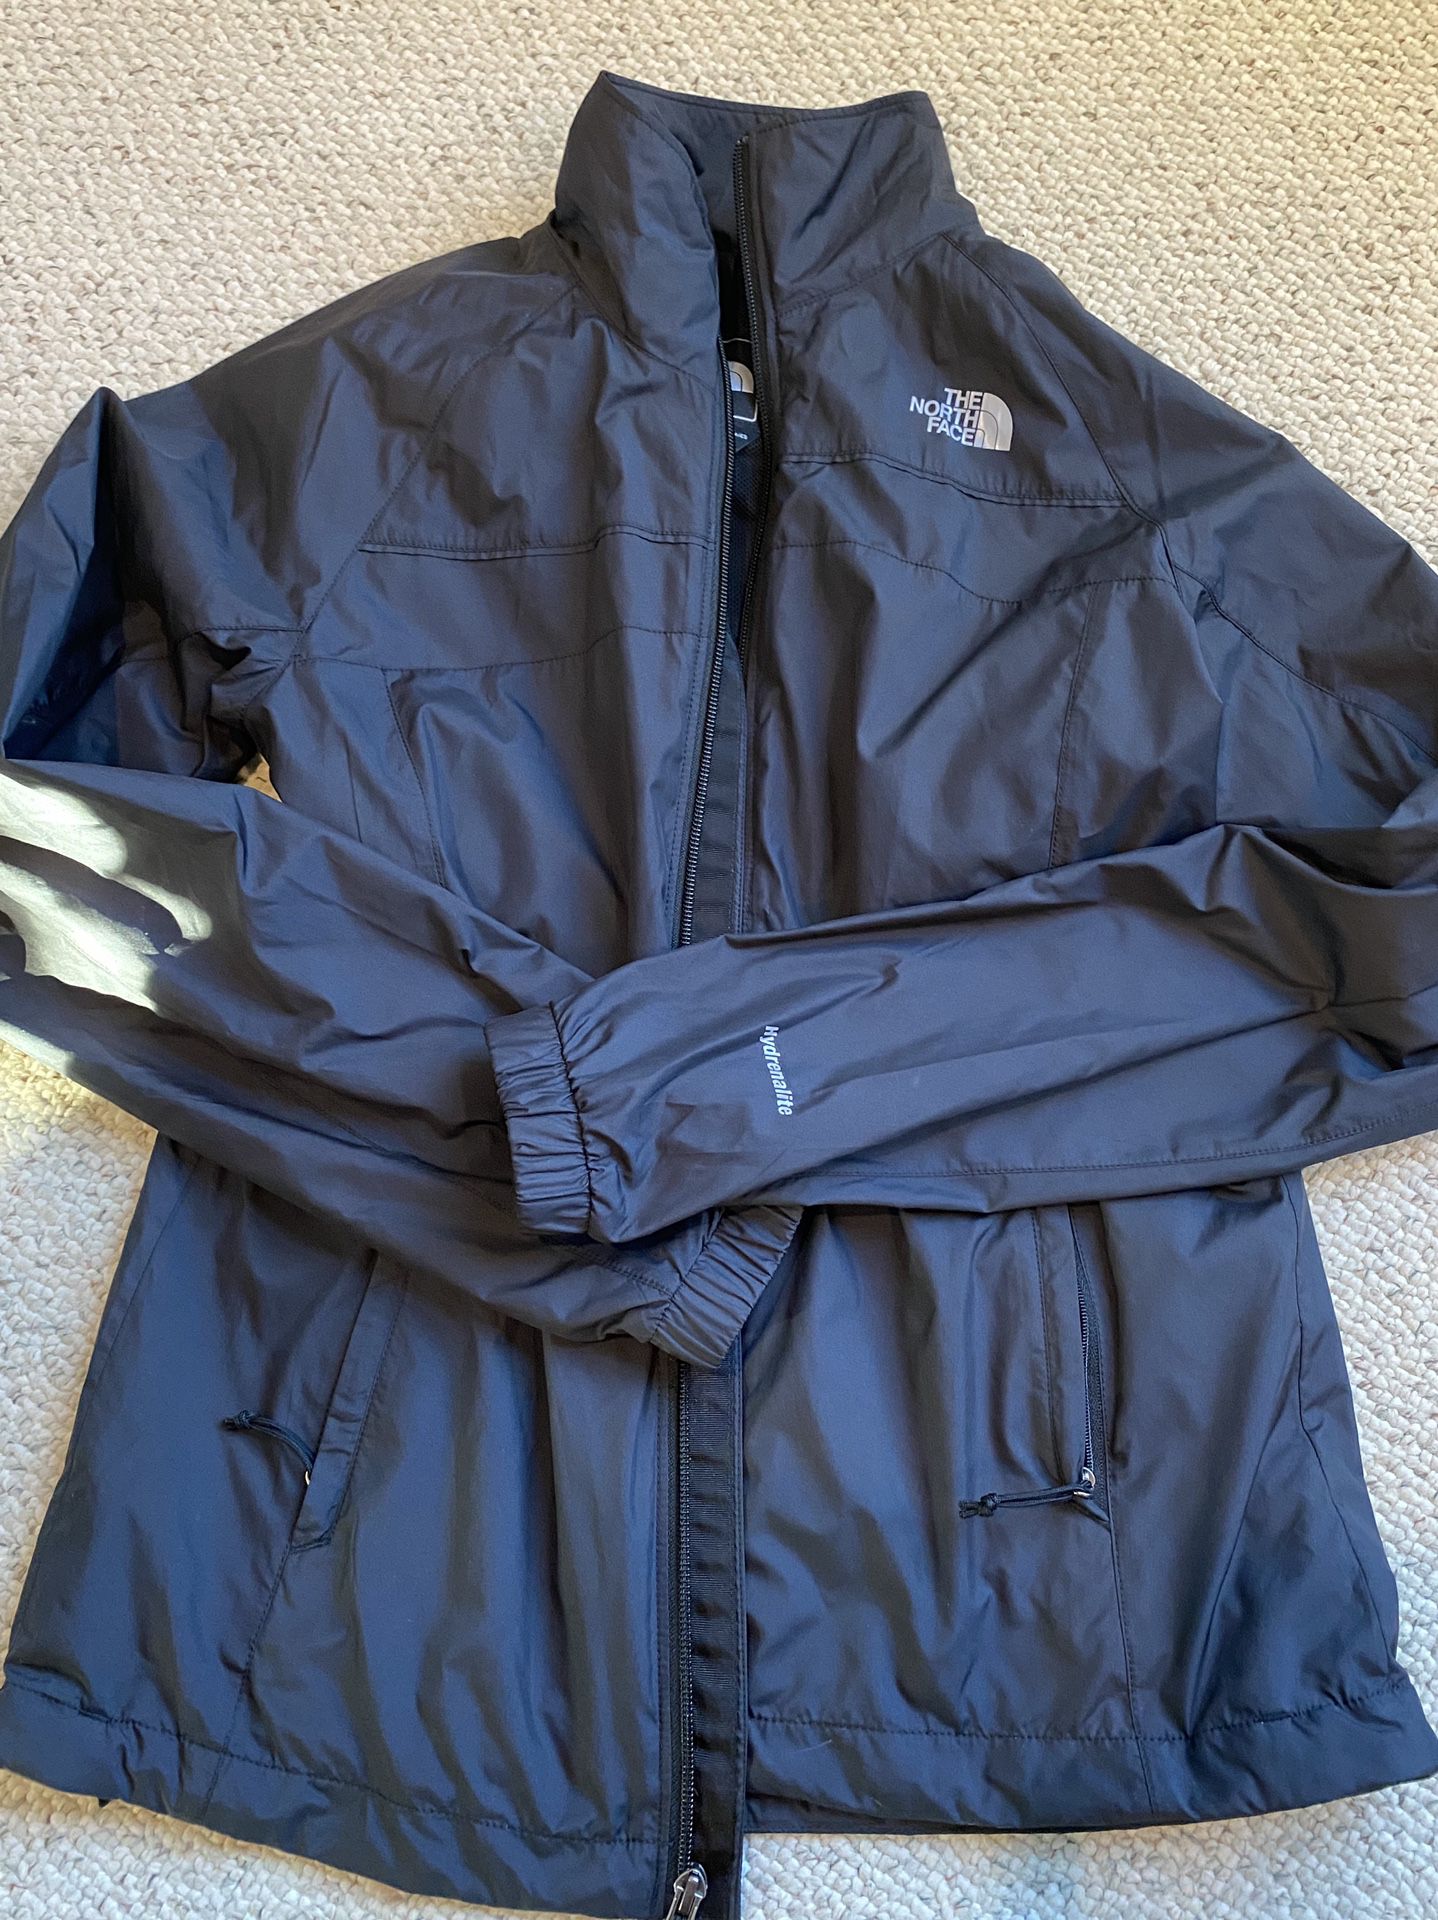 The North Face lightweight jacket